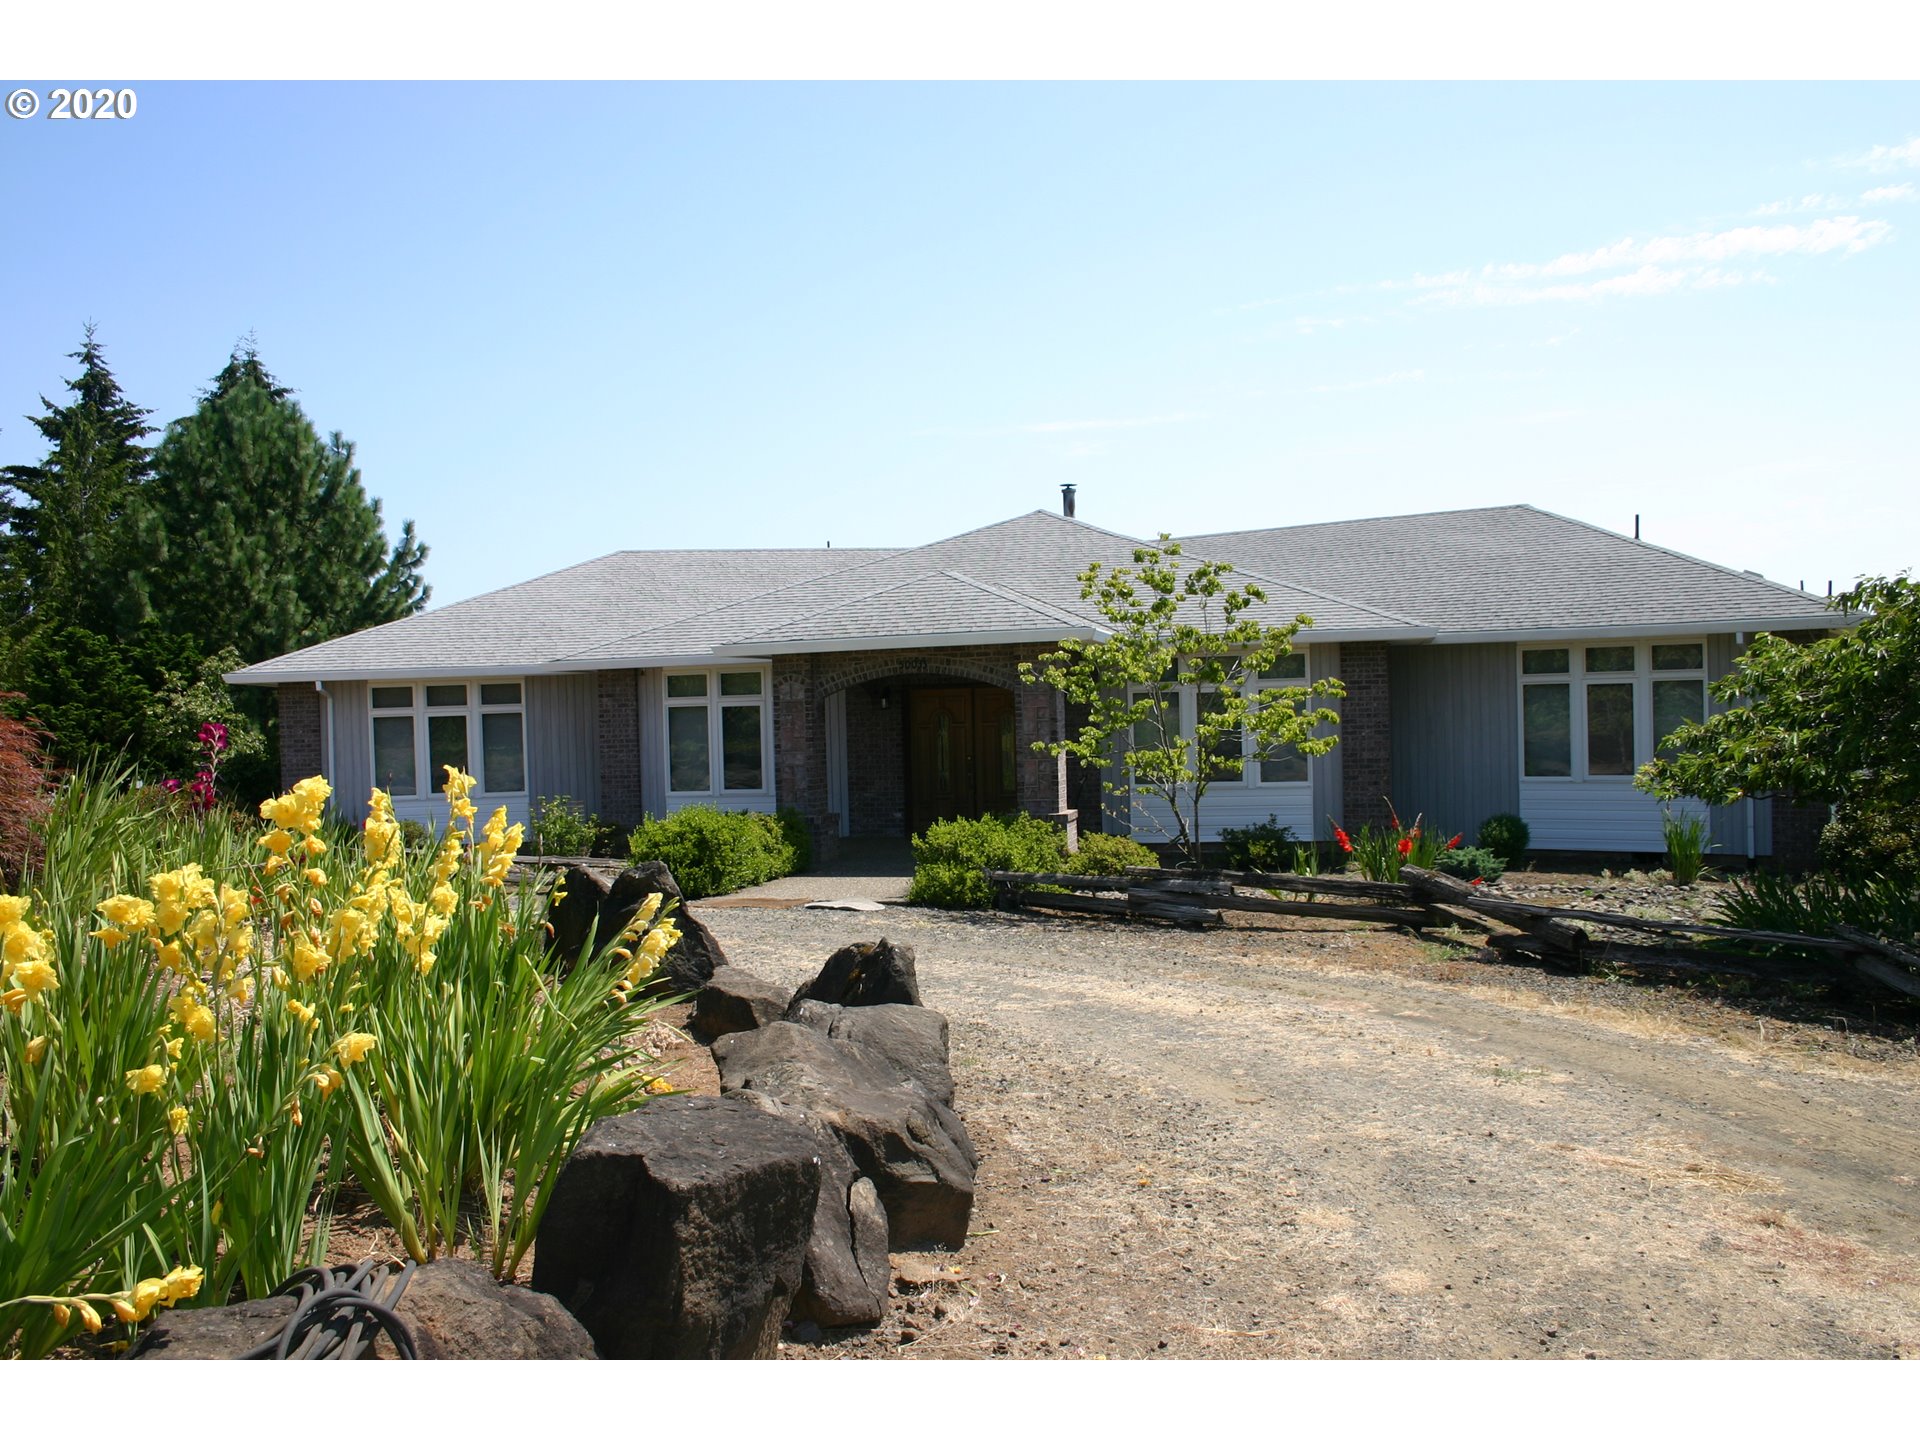 50033 NW CLAPSHAW HILL RD (1 of 14)